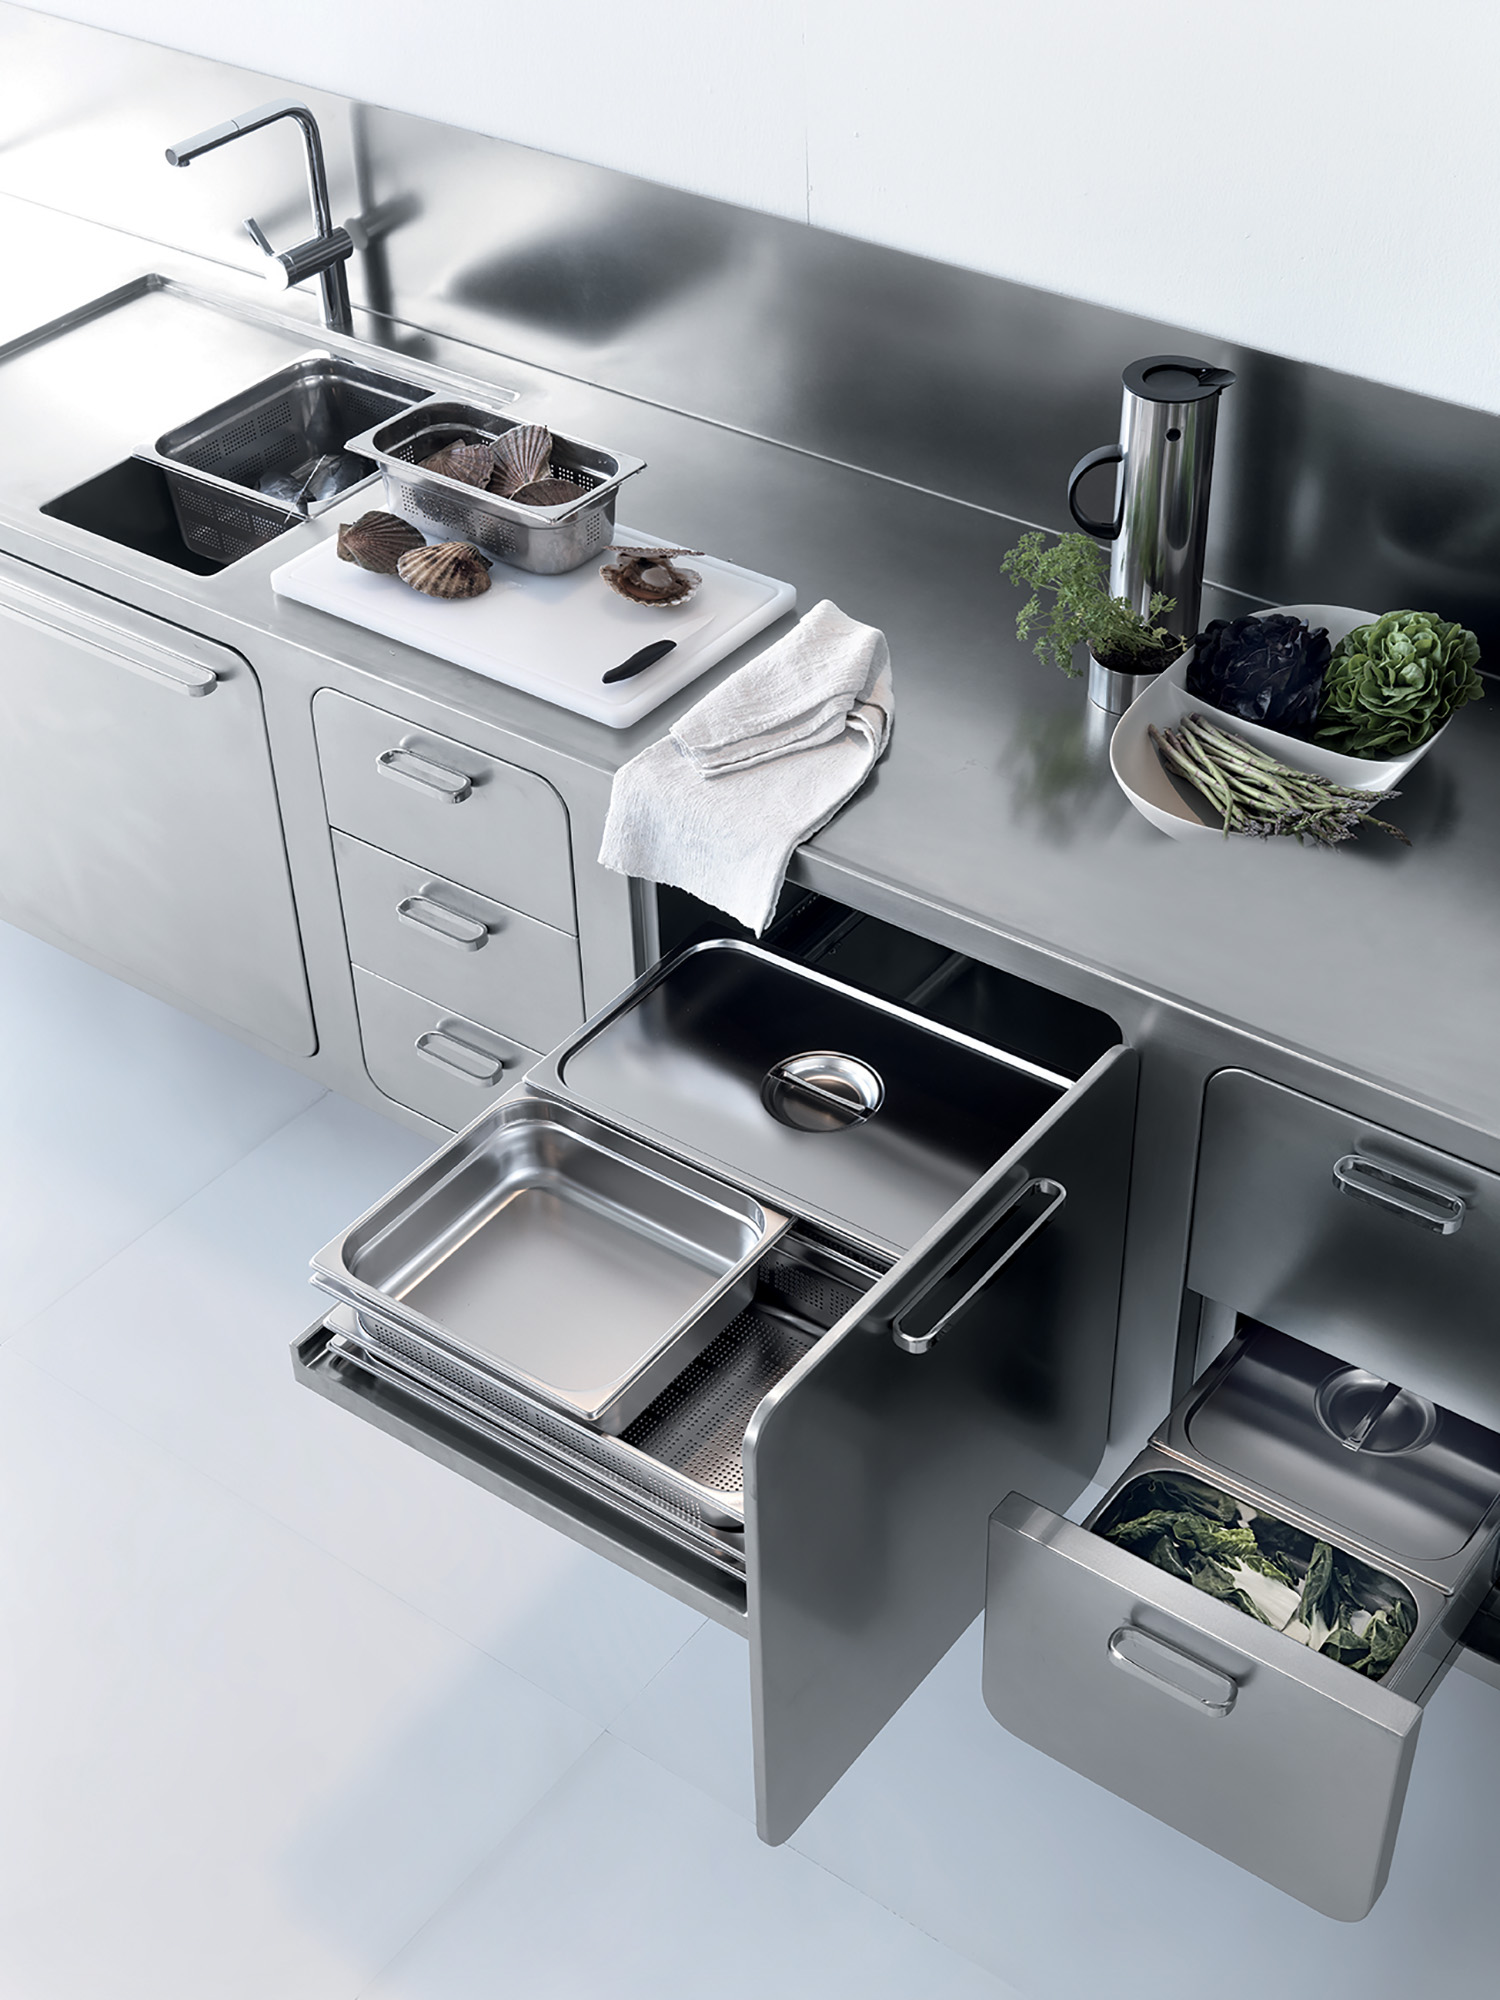 8 reasons to choose a stainless steel kitchen - Abimis